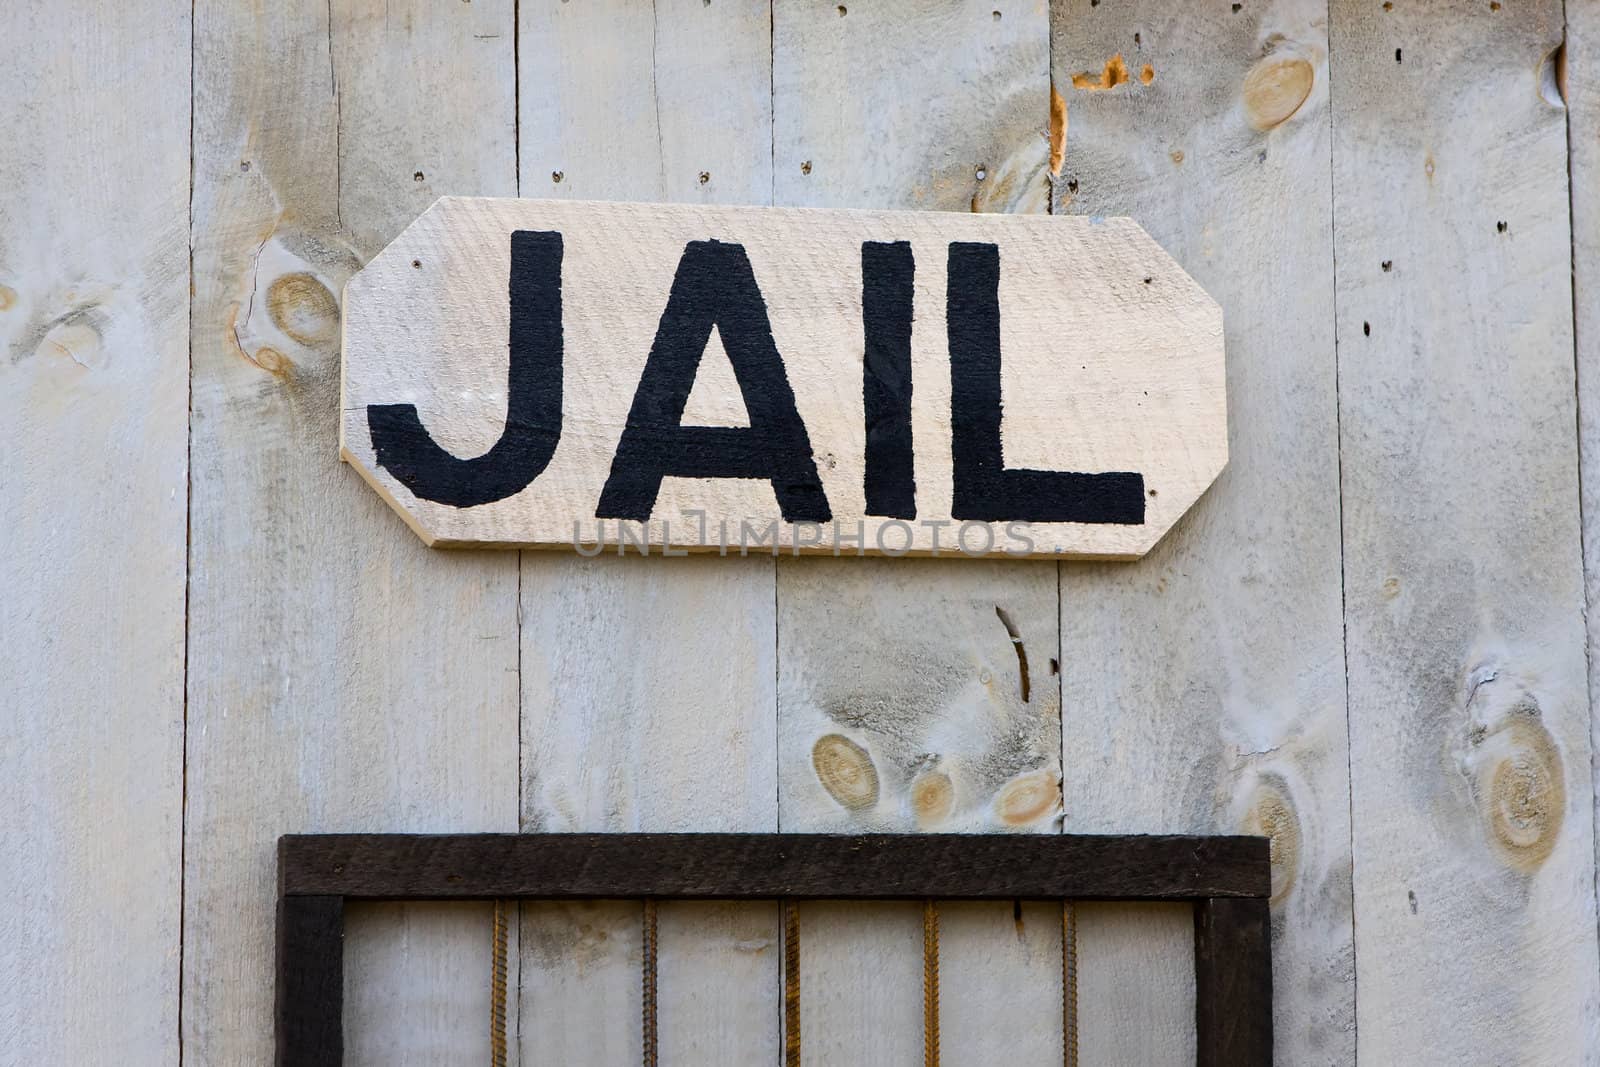 An old-fashioned Western jail sign by Coffee999